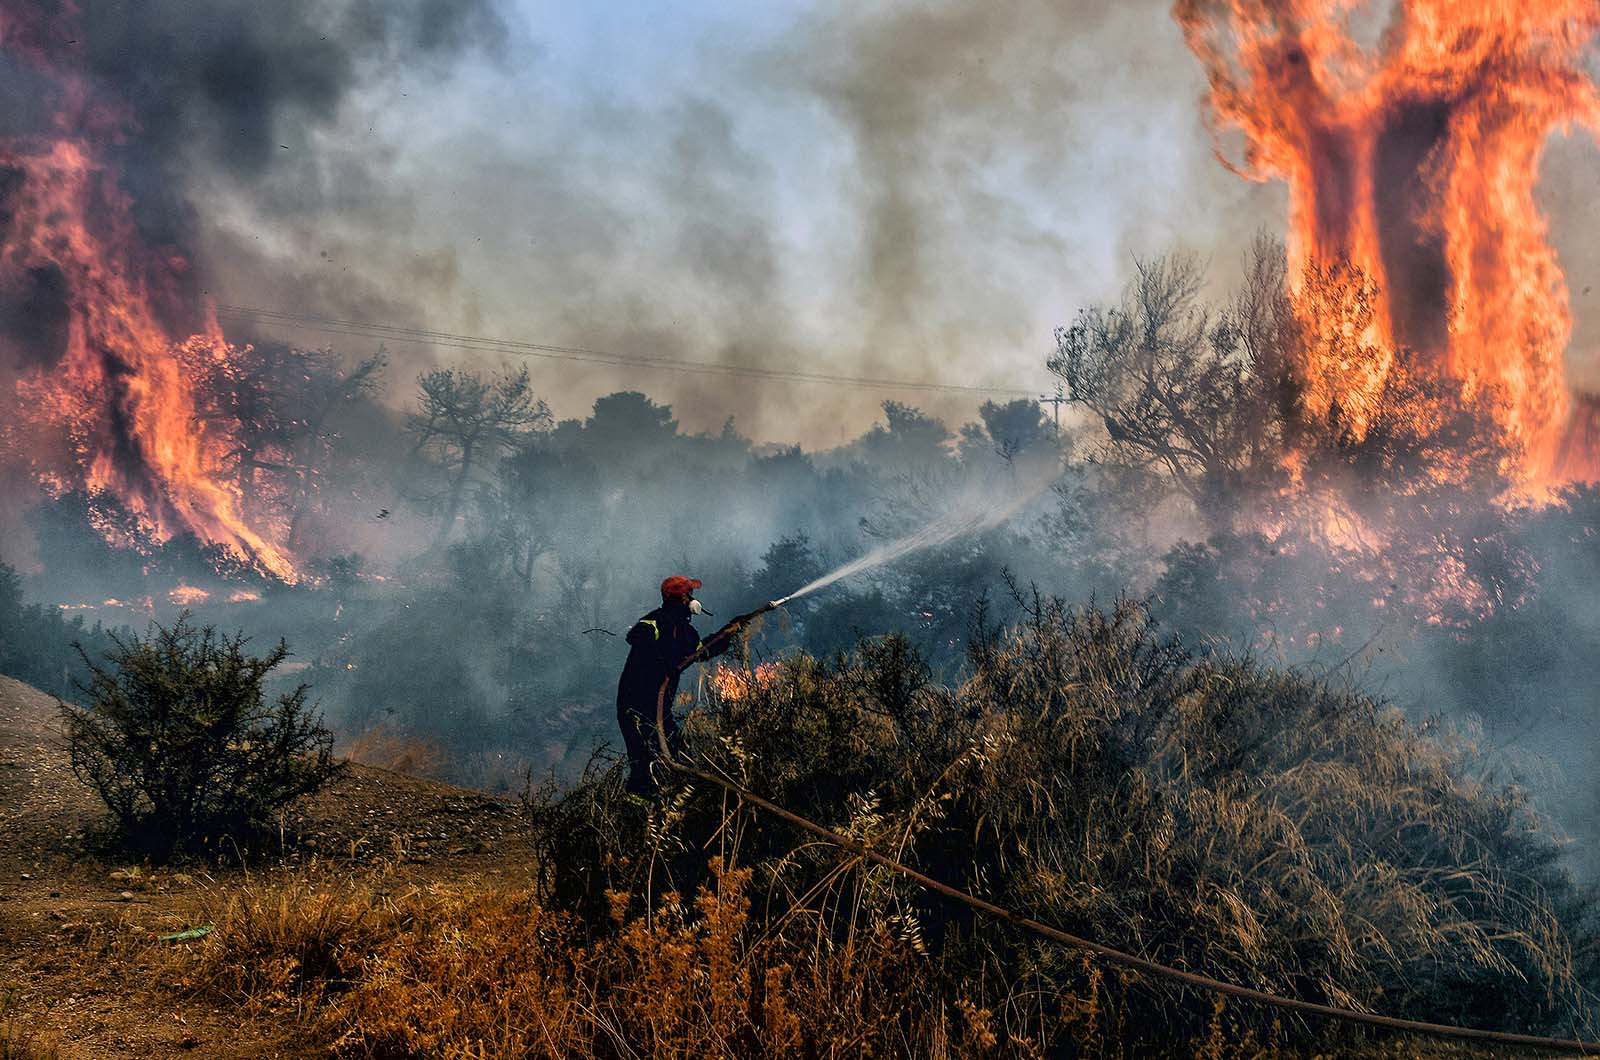 A fireman douses flames on a wildfire near Agioi Theodori, west of Athens, Greece - 18 July, 2023.